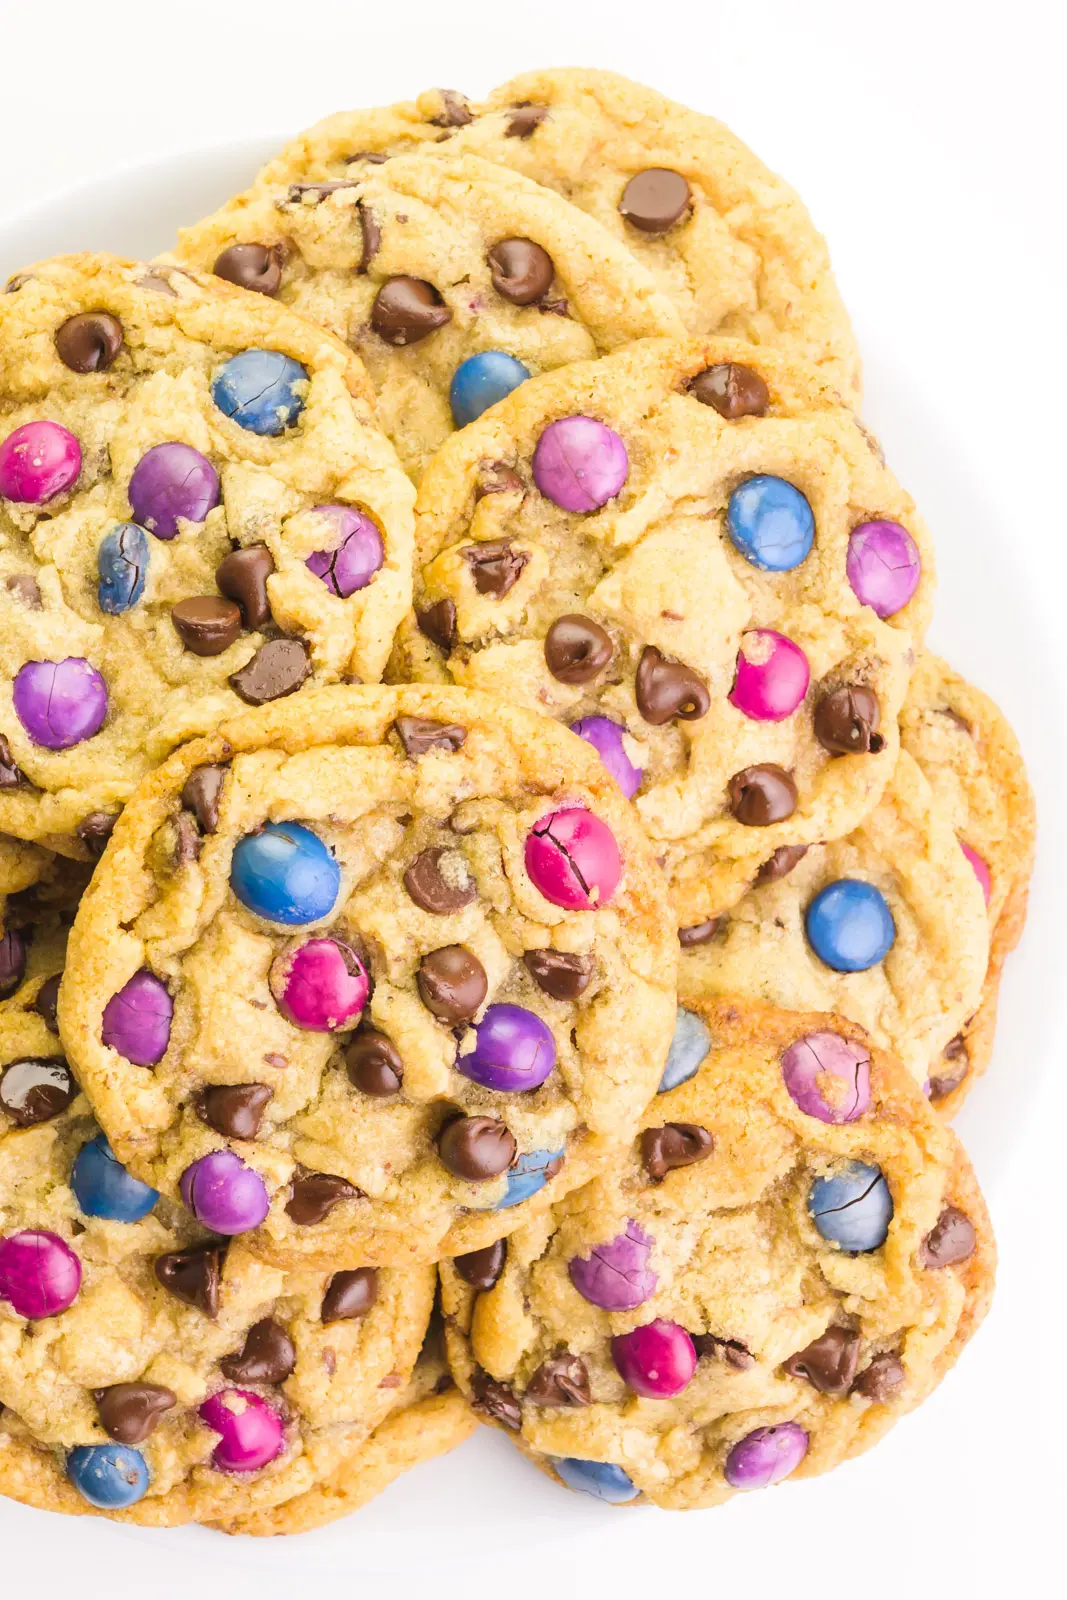 Looking down on a plate full of vegan M&M cookies, with each cookie full of chocolate chips and colorful candy pieces.